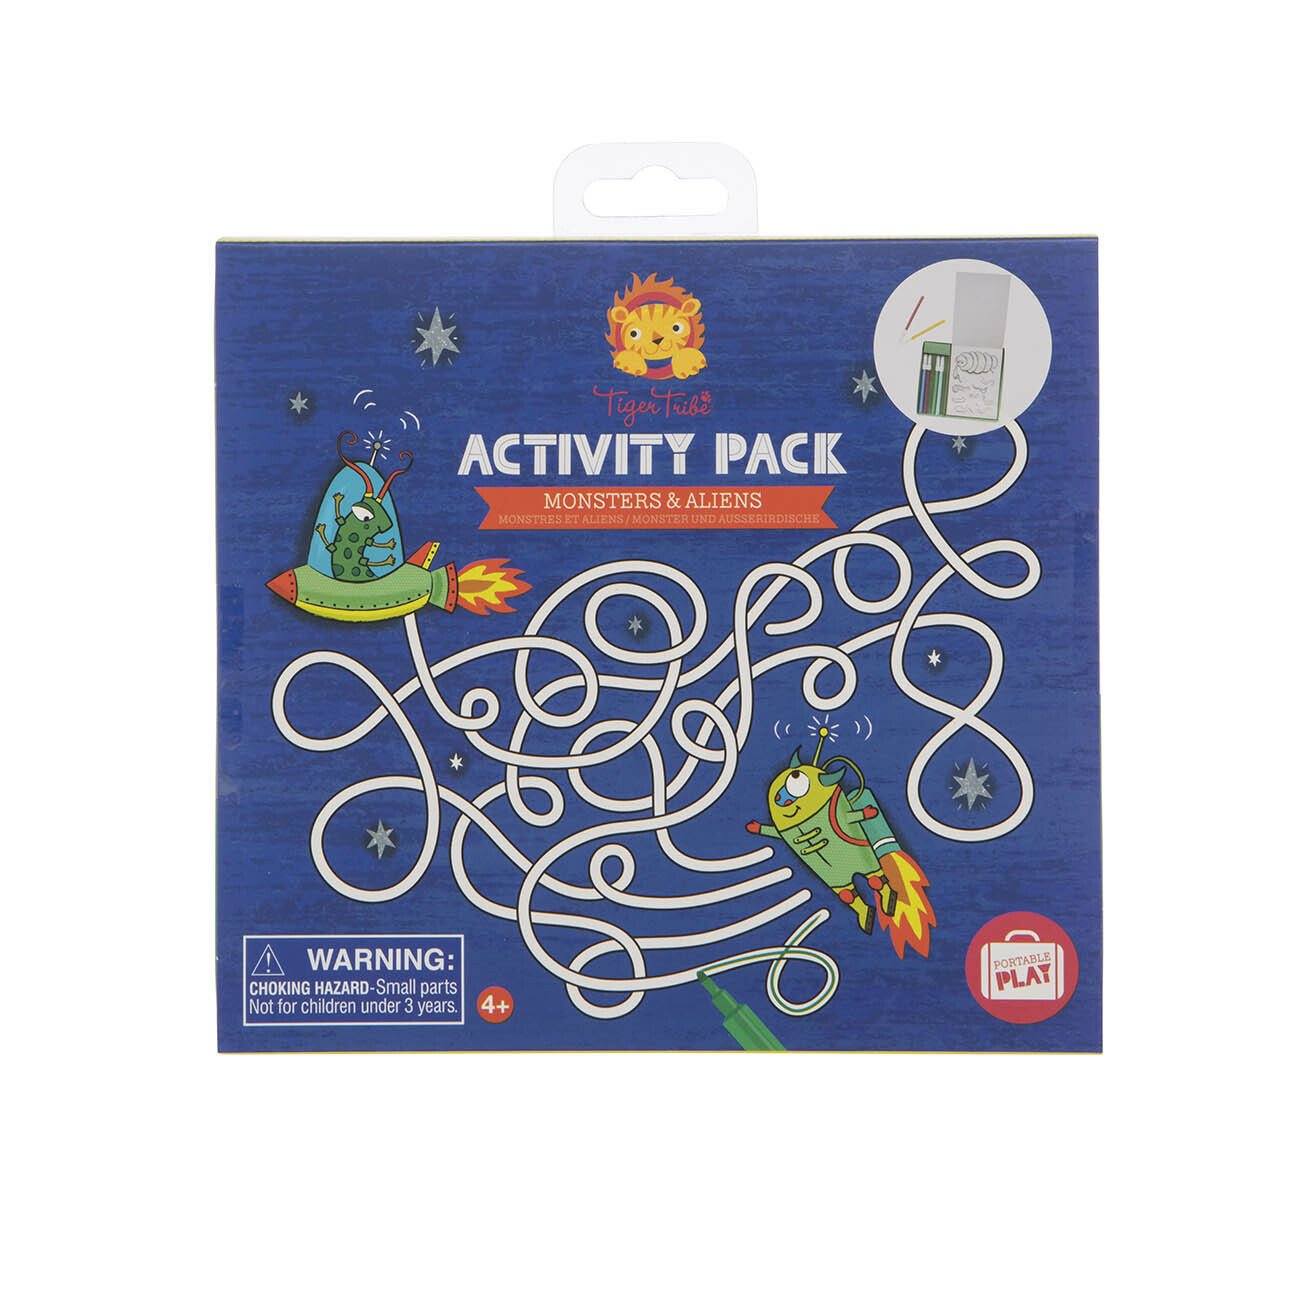 Activity Pack (Monsters & Aliens)